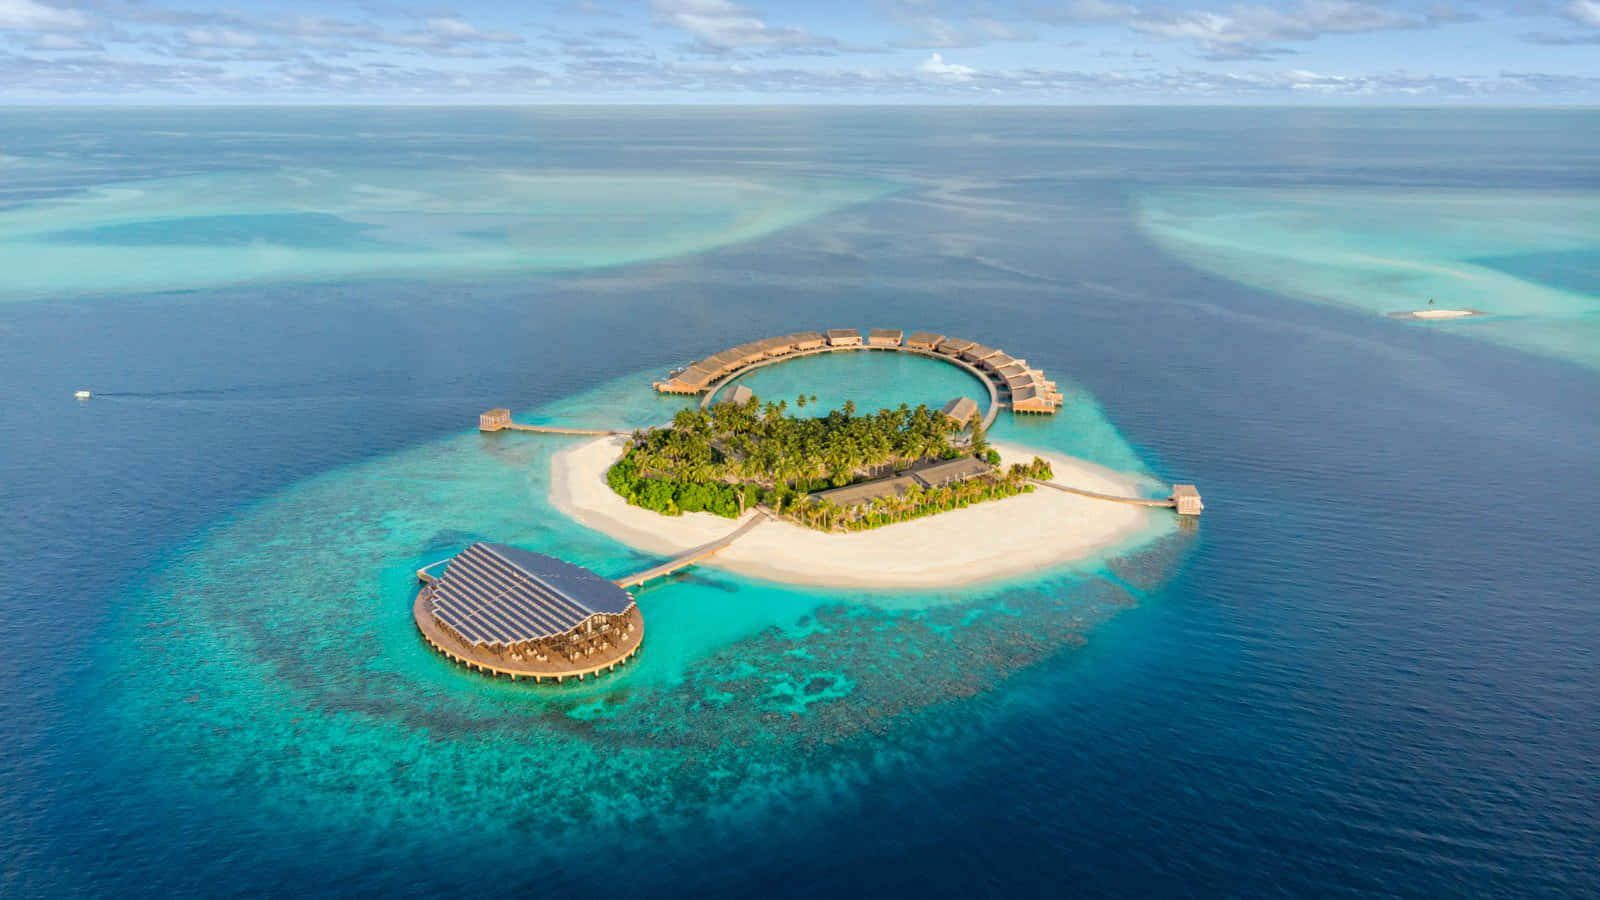 Relish in the beauty of Maldives